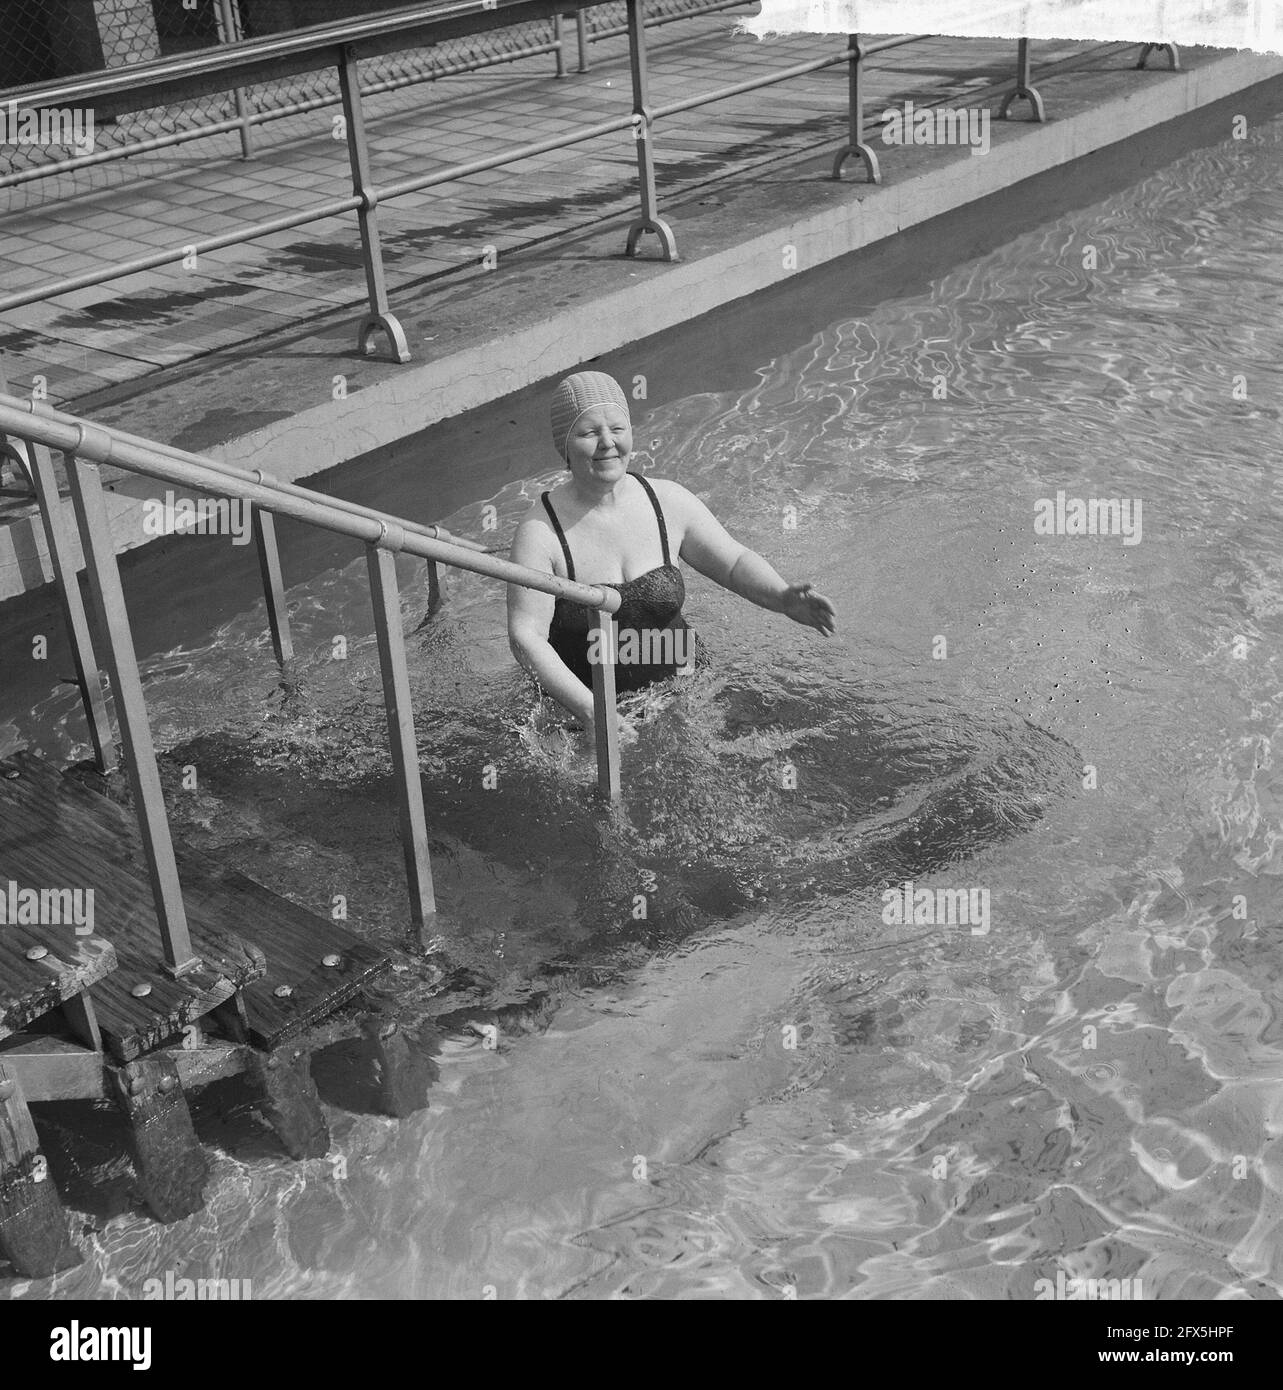 Municipal open air baths in Amsterdam reopened, the first dive by the ladies. Mirandabad, May 20 1963, open air baths, The Netherlands, 20th century press agency photo, news to remember, documentary, historic photography 1945-1990, visual stories, human history of the Twentieth Century, capturing moments in time Stock Photo